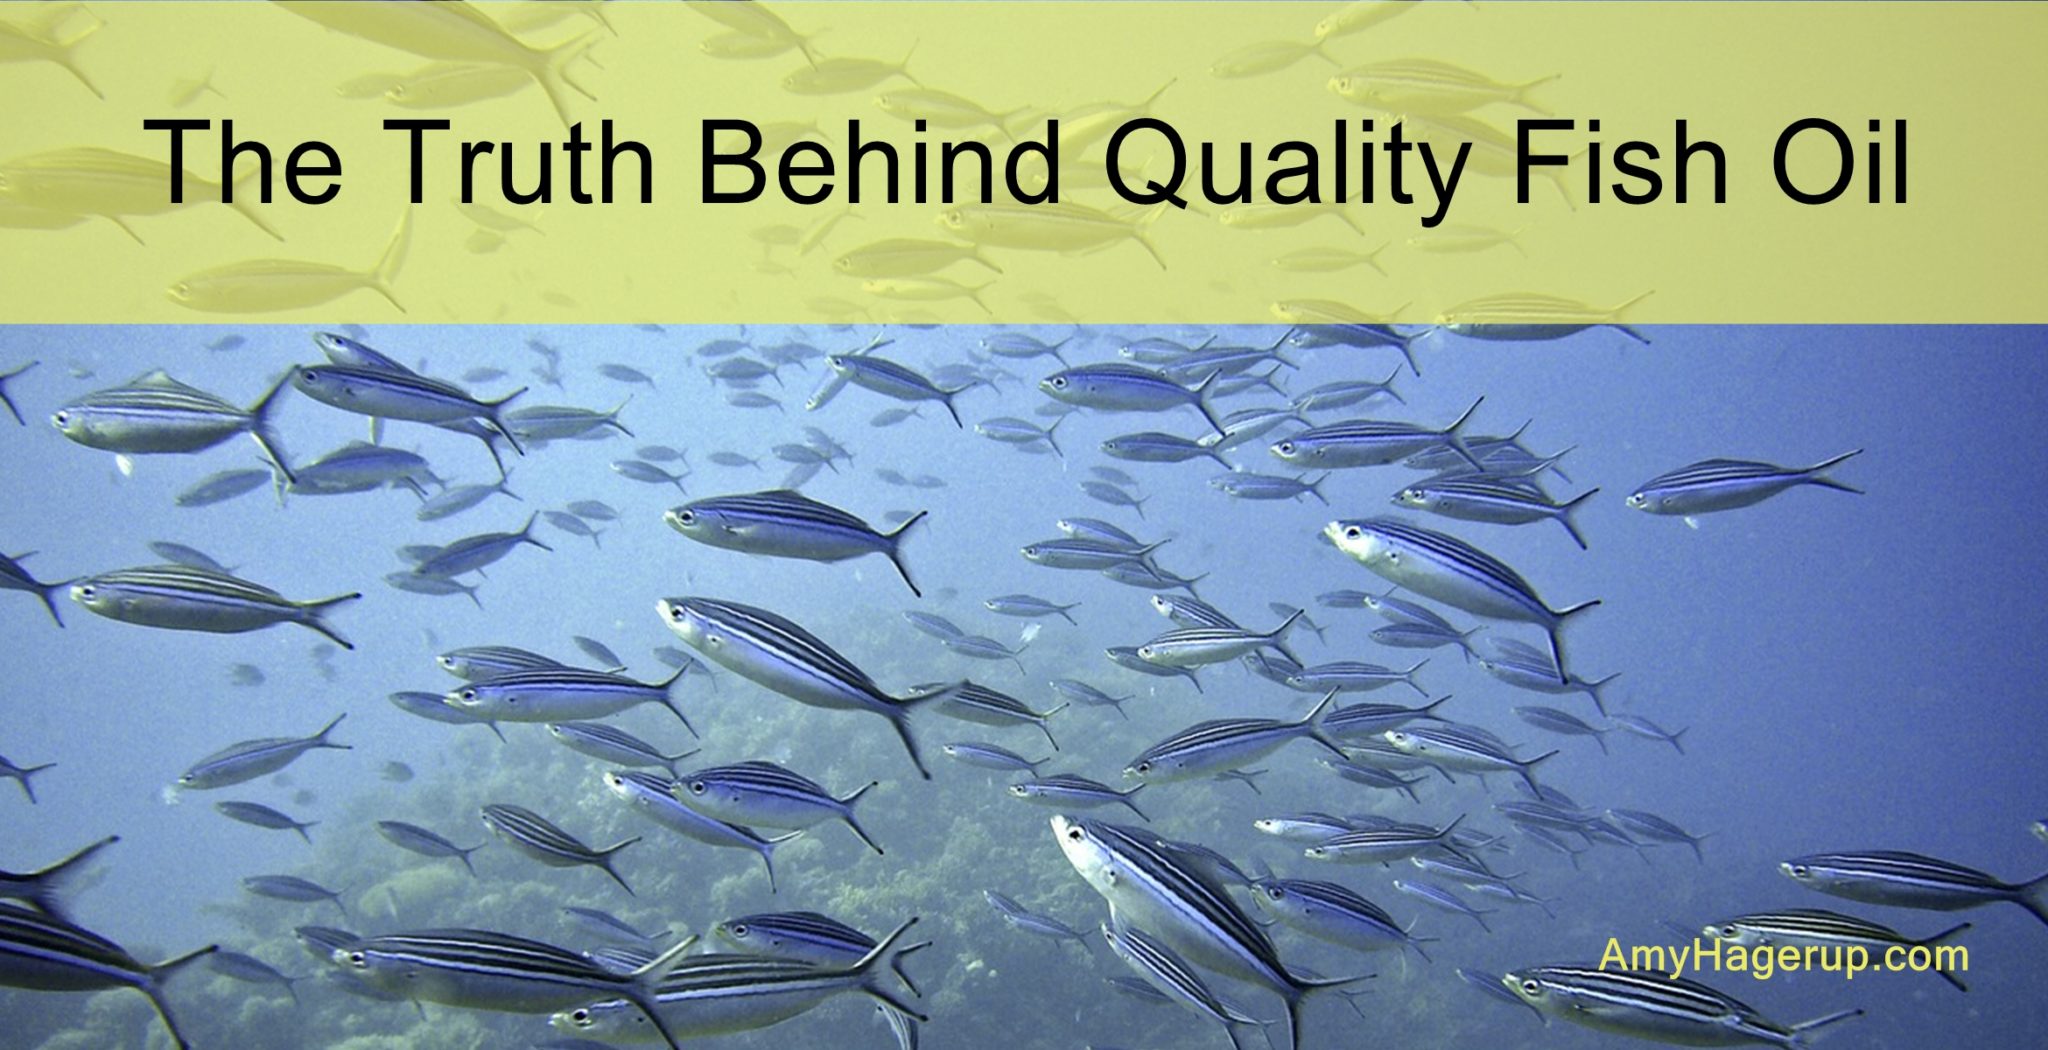 Here is the truth behind quality fish oil.